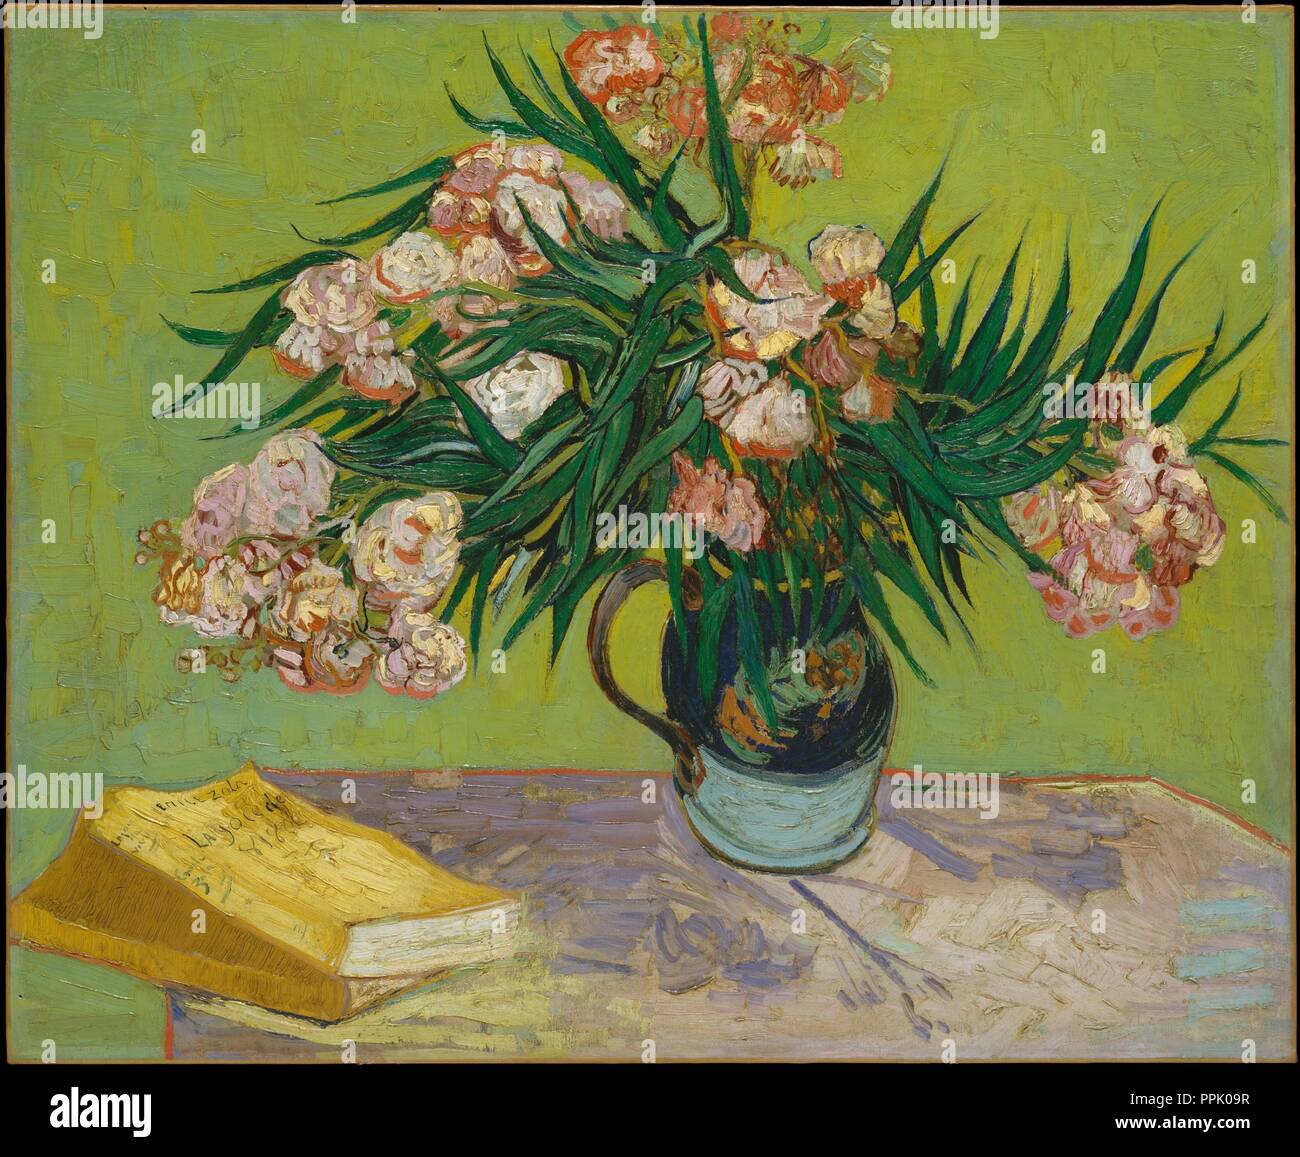 Oleanders. Artist: Vincent van Gogh (Dutch, Zundert 1853-1890 Auvers-sur-Oise). Dimensions: 23 3/4 x 29 in. (60.3 x 73.7 cm). Date: 1888.  For Van Gogh, oleanders were joyous, life-affirming flowers that bloomed 'inexhaustibly' and were always 'putting out strong new shoots.' In this painting of August 1888 the flowers fill a majolica jug that the artist used for other still lifes made in Arles. They are symbolically juxtaposed with Émile Zola's <i>La joie de vivre</i>, a novel that Van Gogh had placed in contrast to an open Bible in a Nuenen still life of 1885. Museum: Metropolitan Museum of  Stock Photo